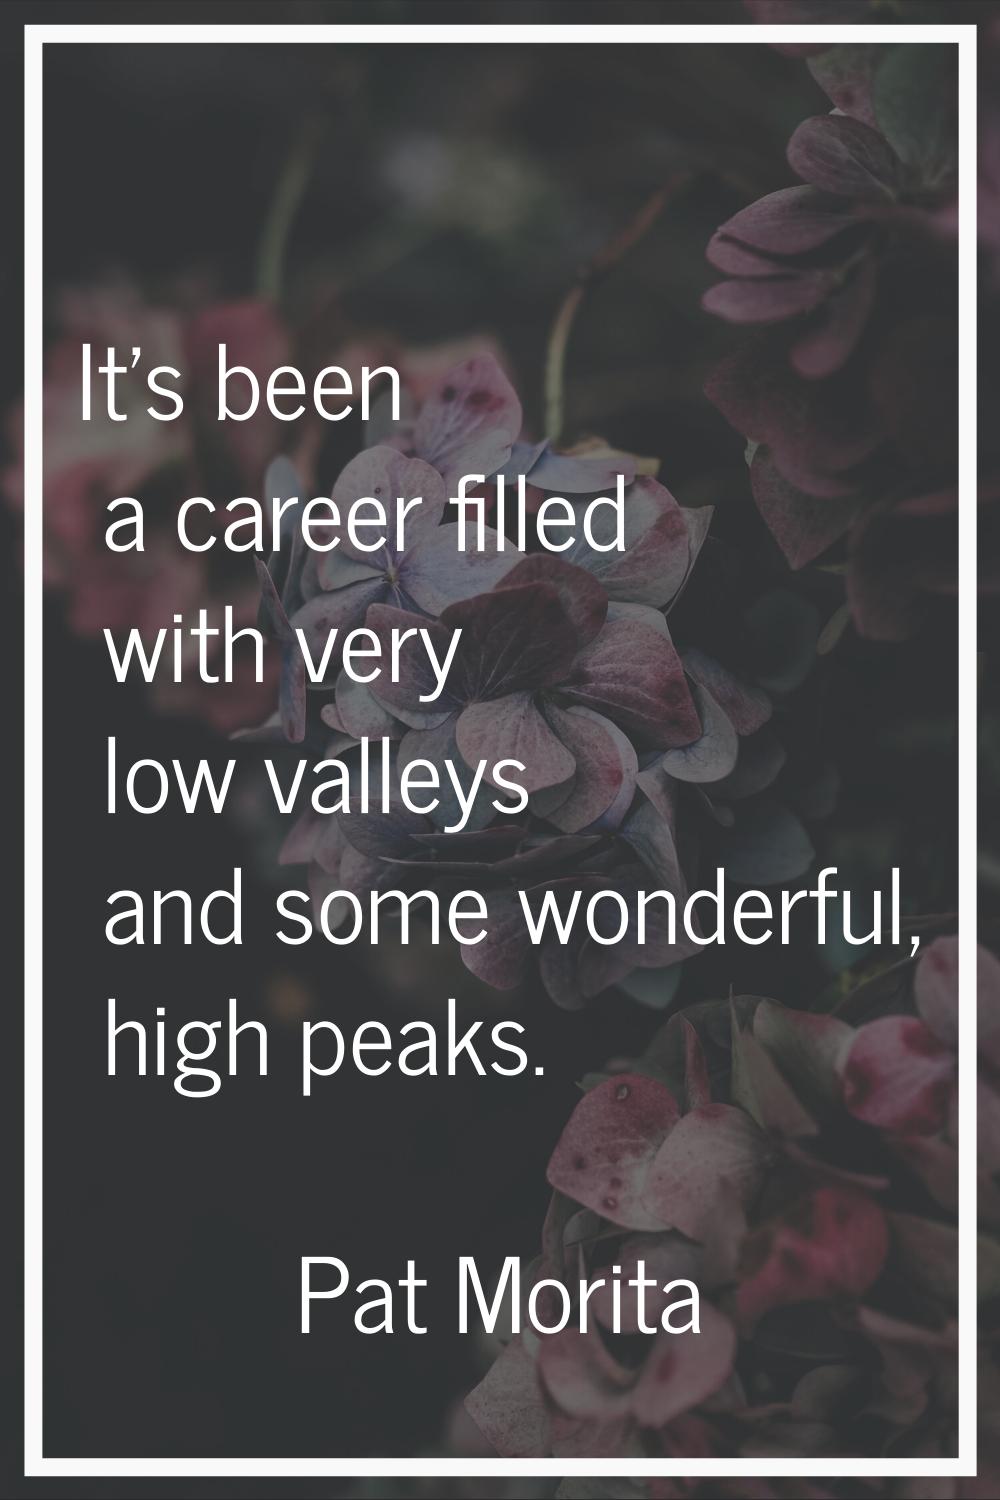 It's been a career filled with very low valleys and some wonderful, high peaks.